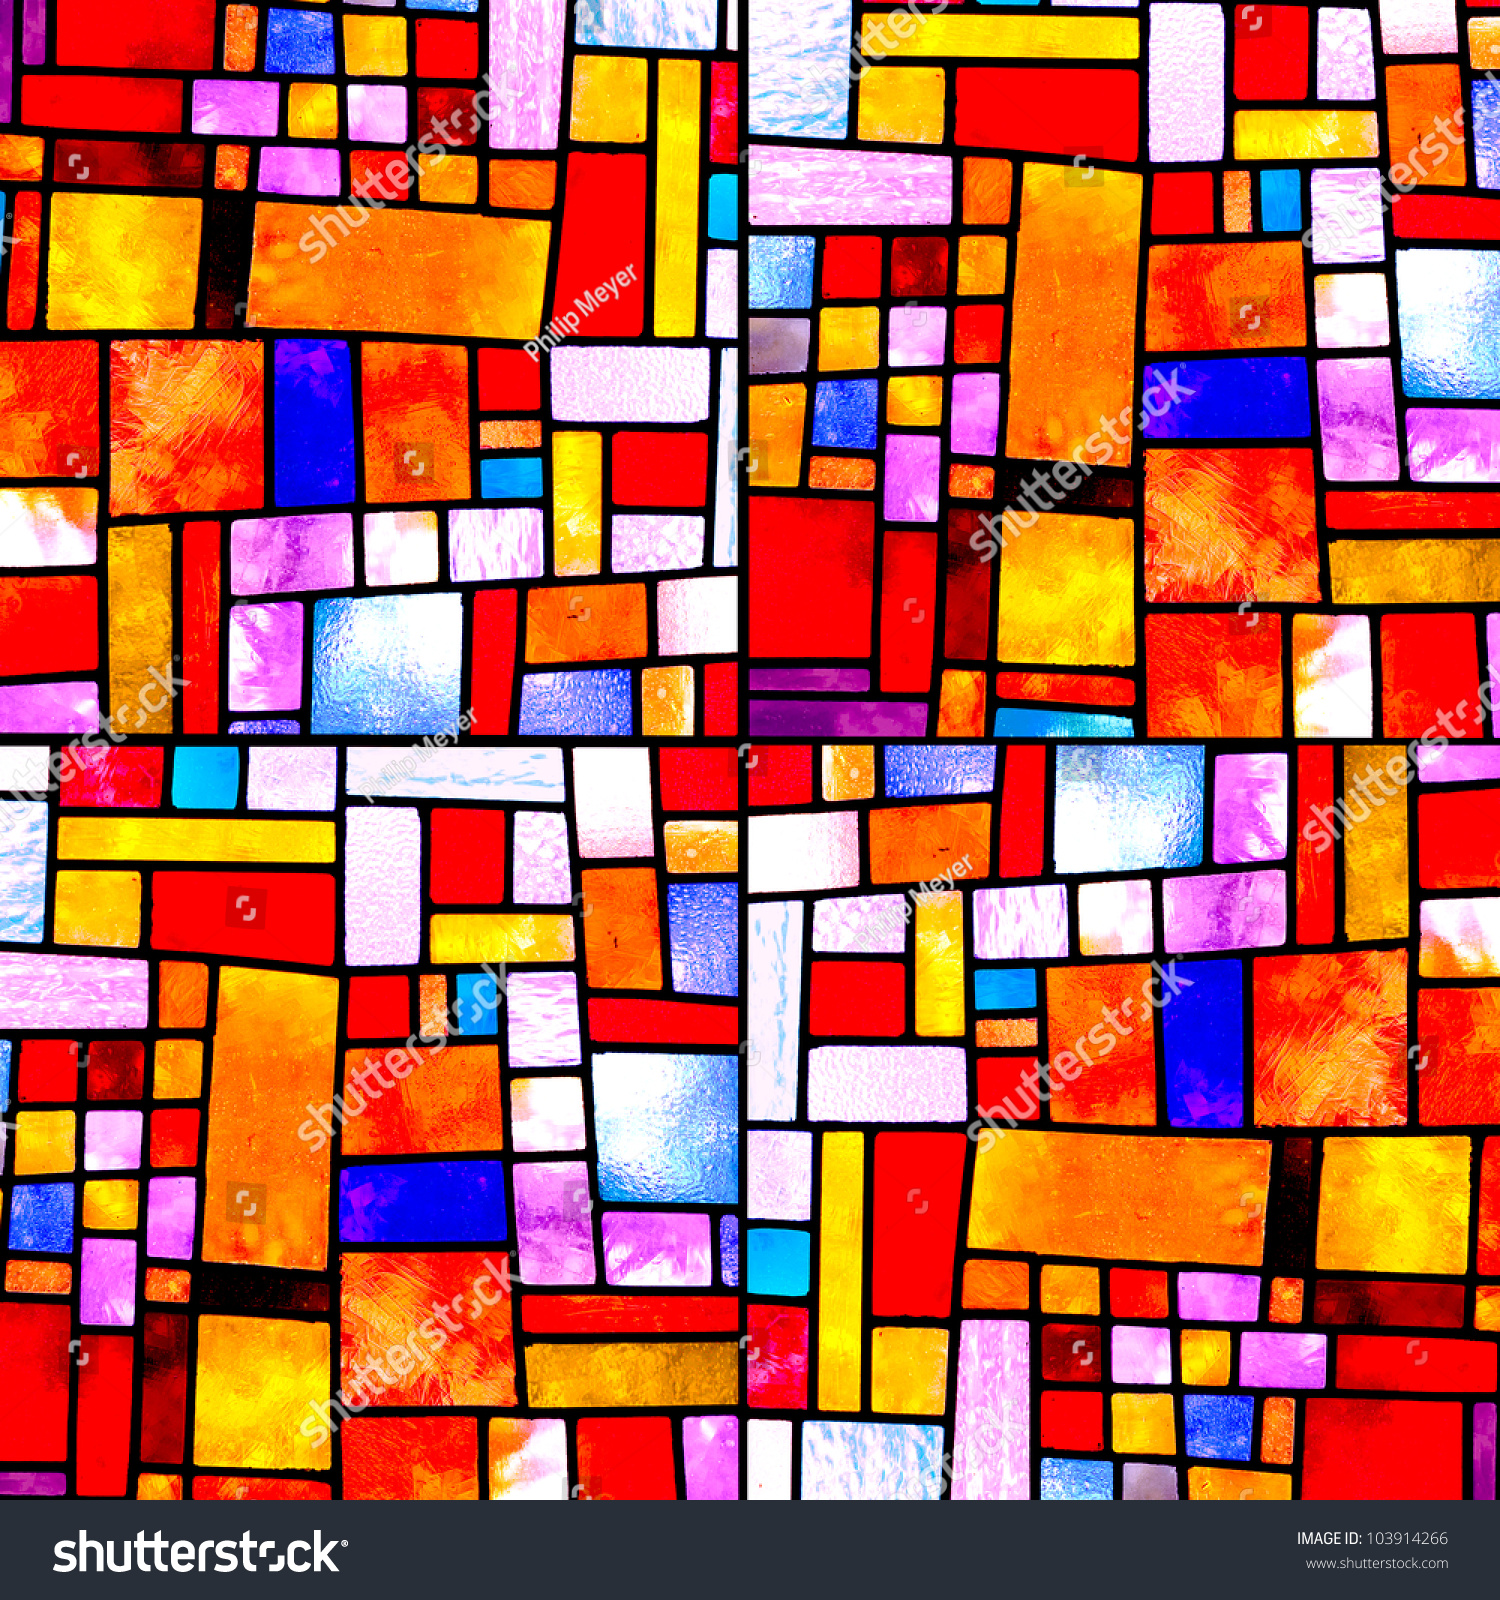 Image of a multicolored stained glass window with irregular random block pattern, square format #103914266